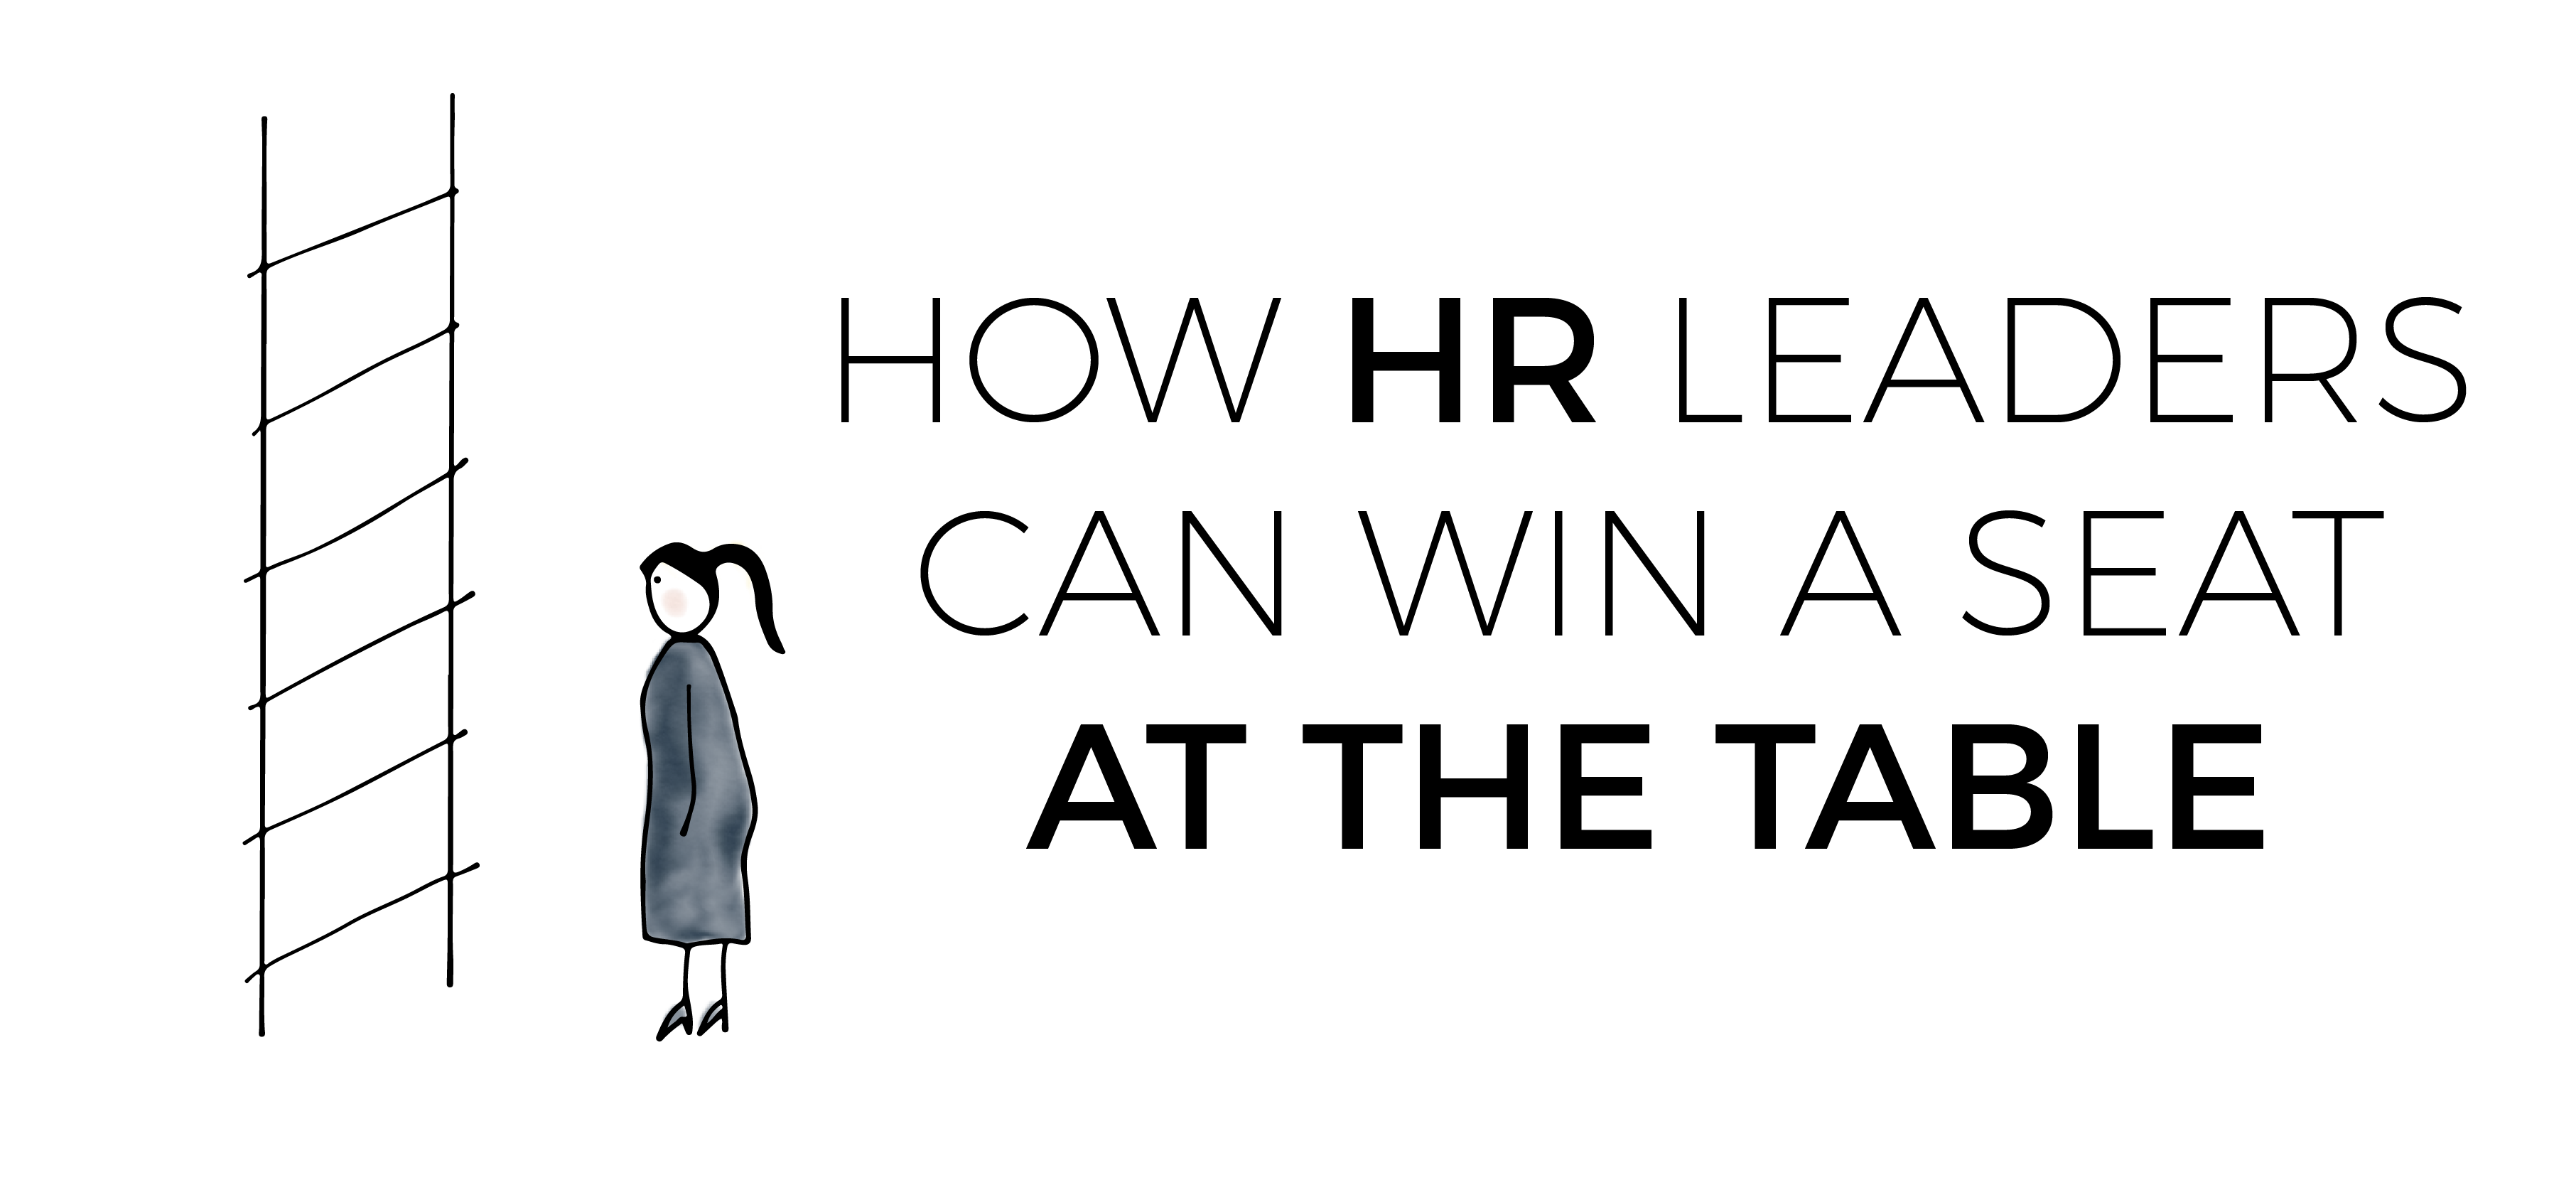 How HR Leaders Can Win a Seat at the Table